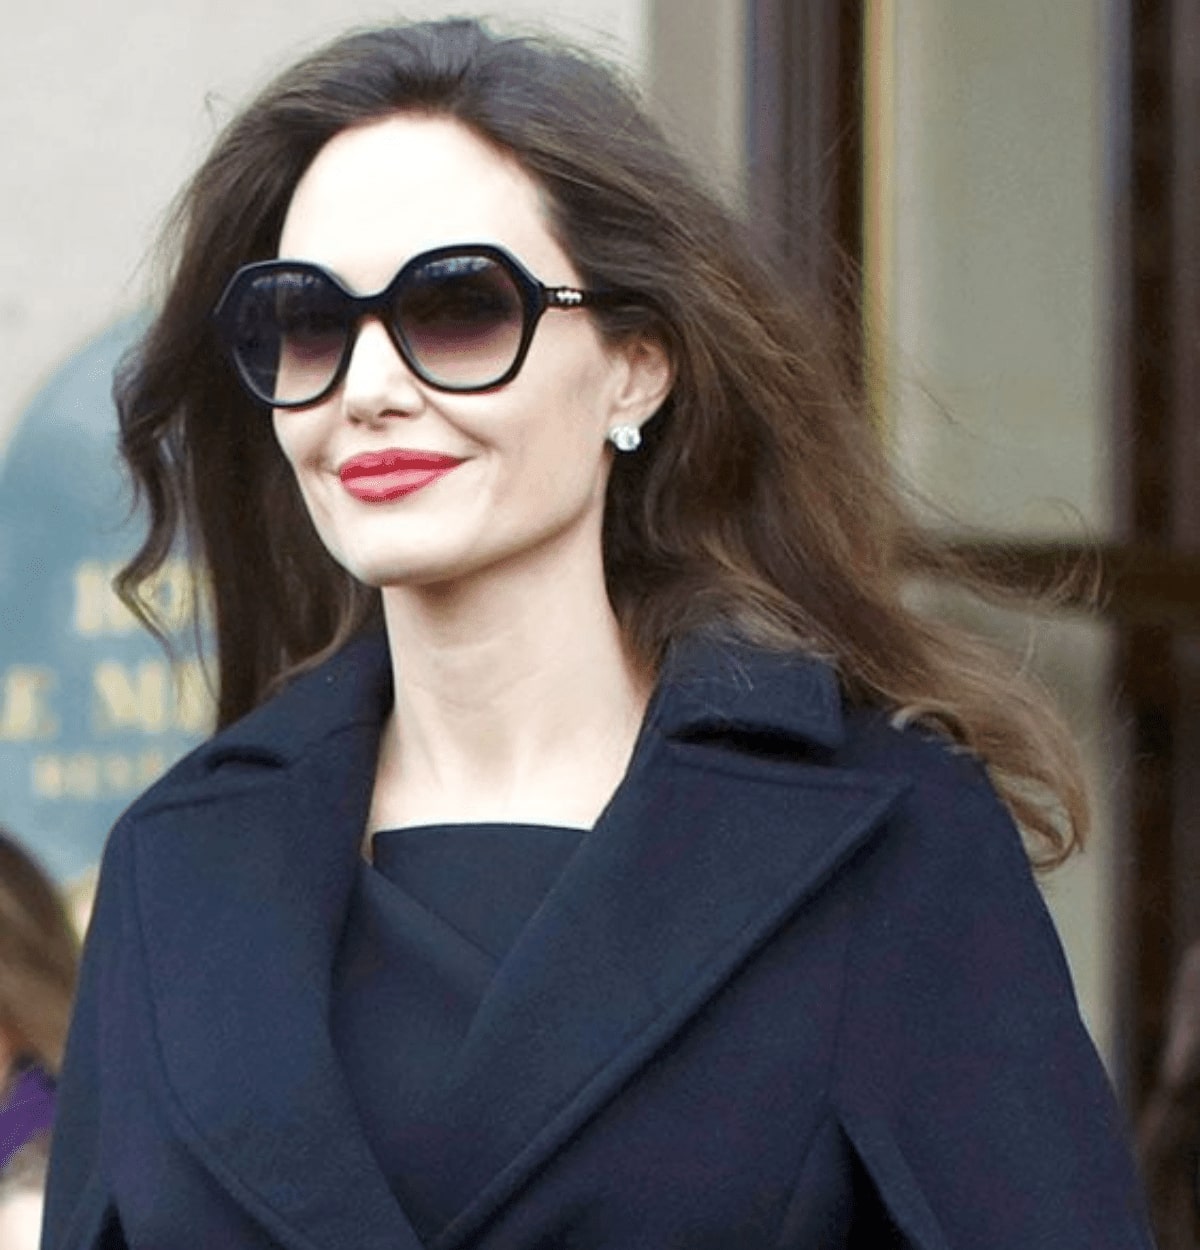 angelina jolie wearing a pair of sunglasses while visiting the louvre museum